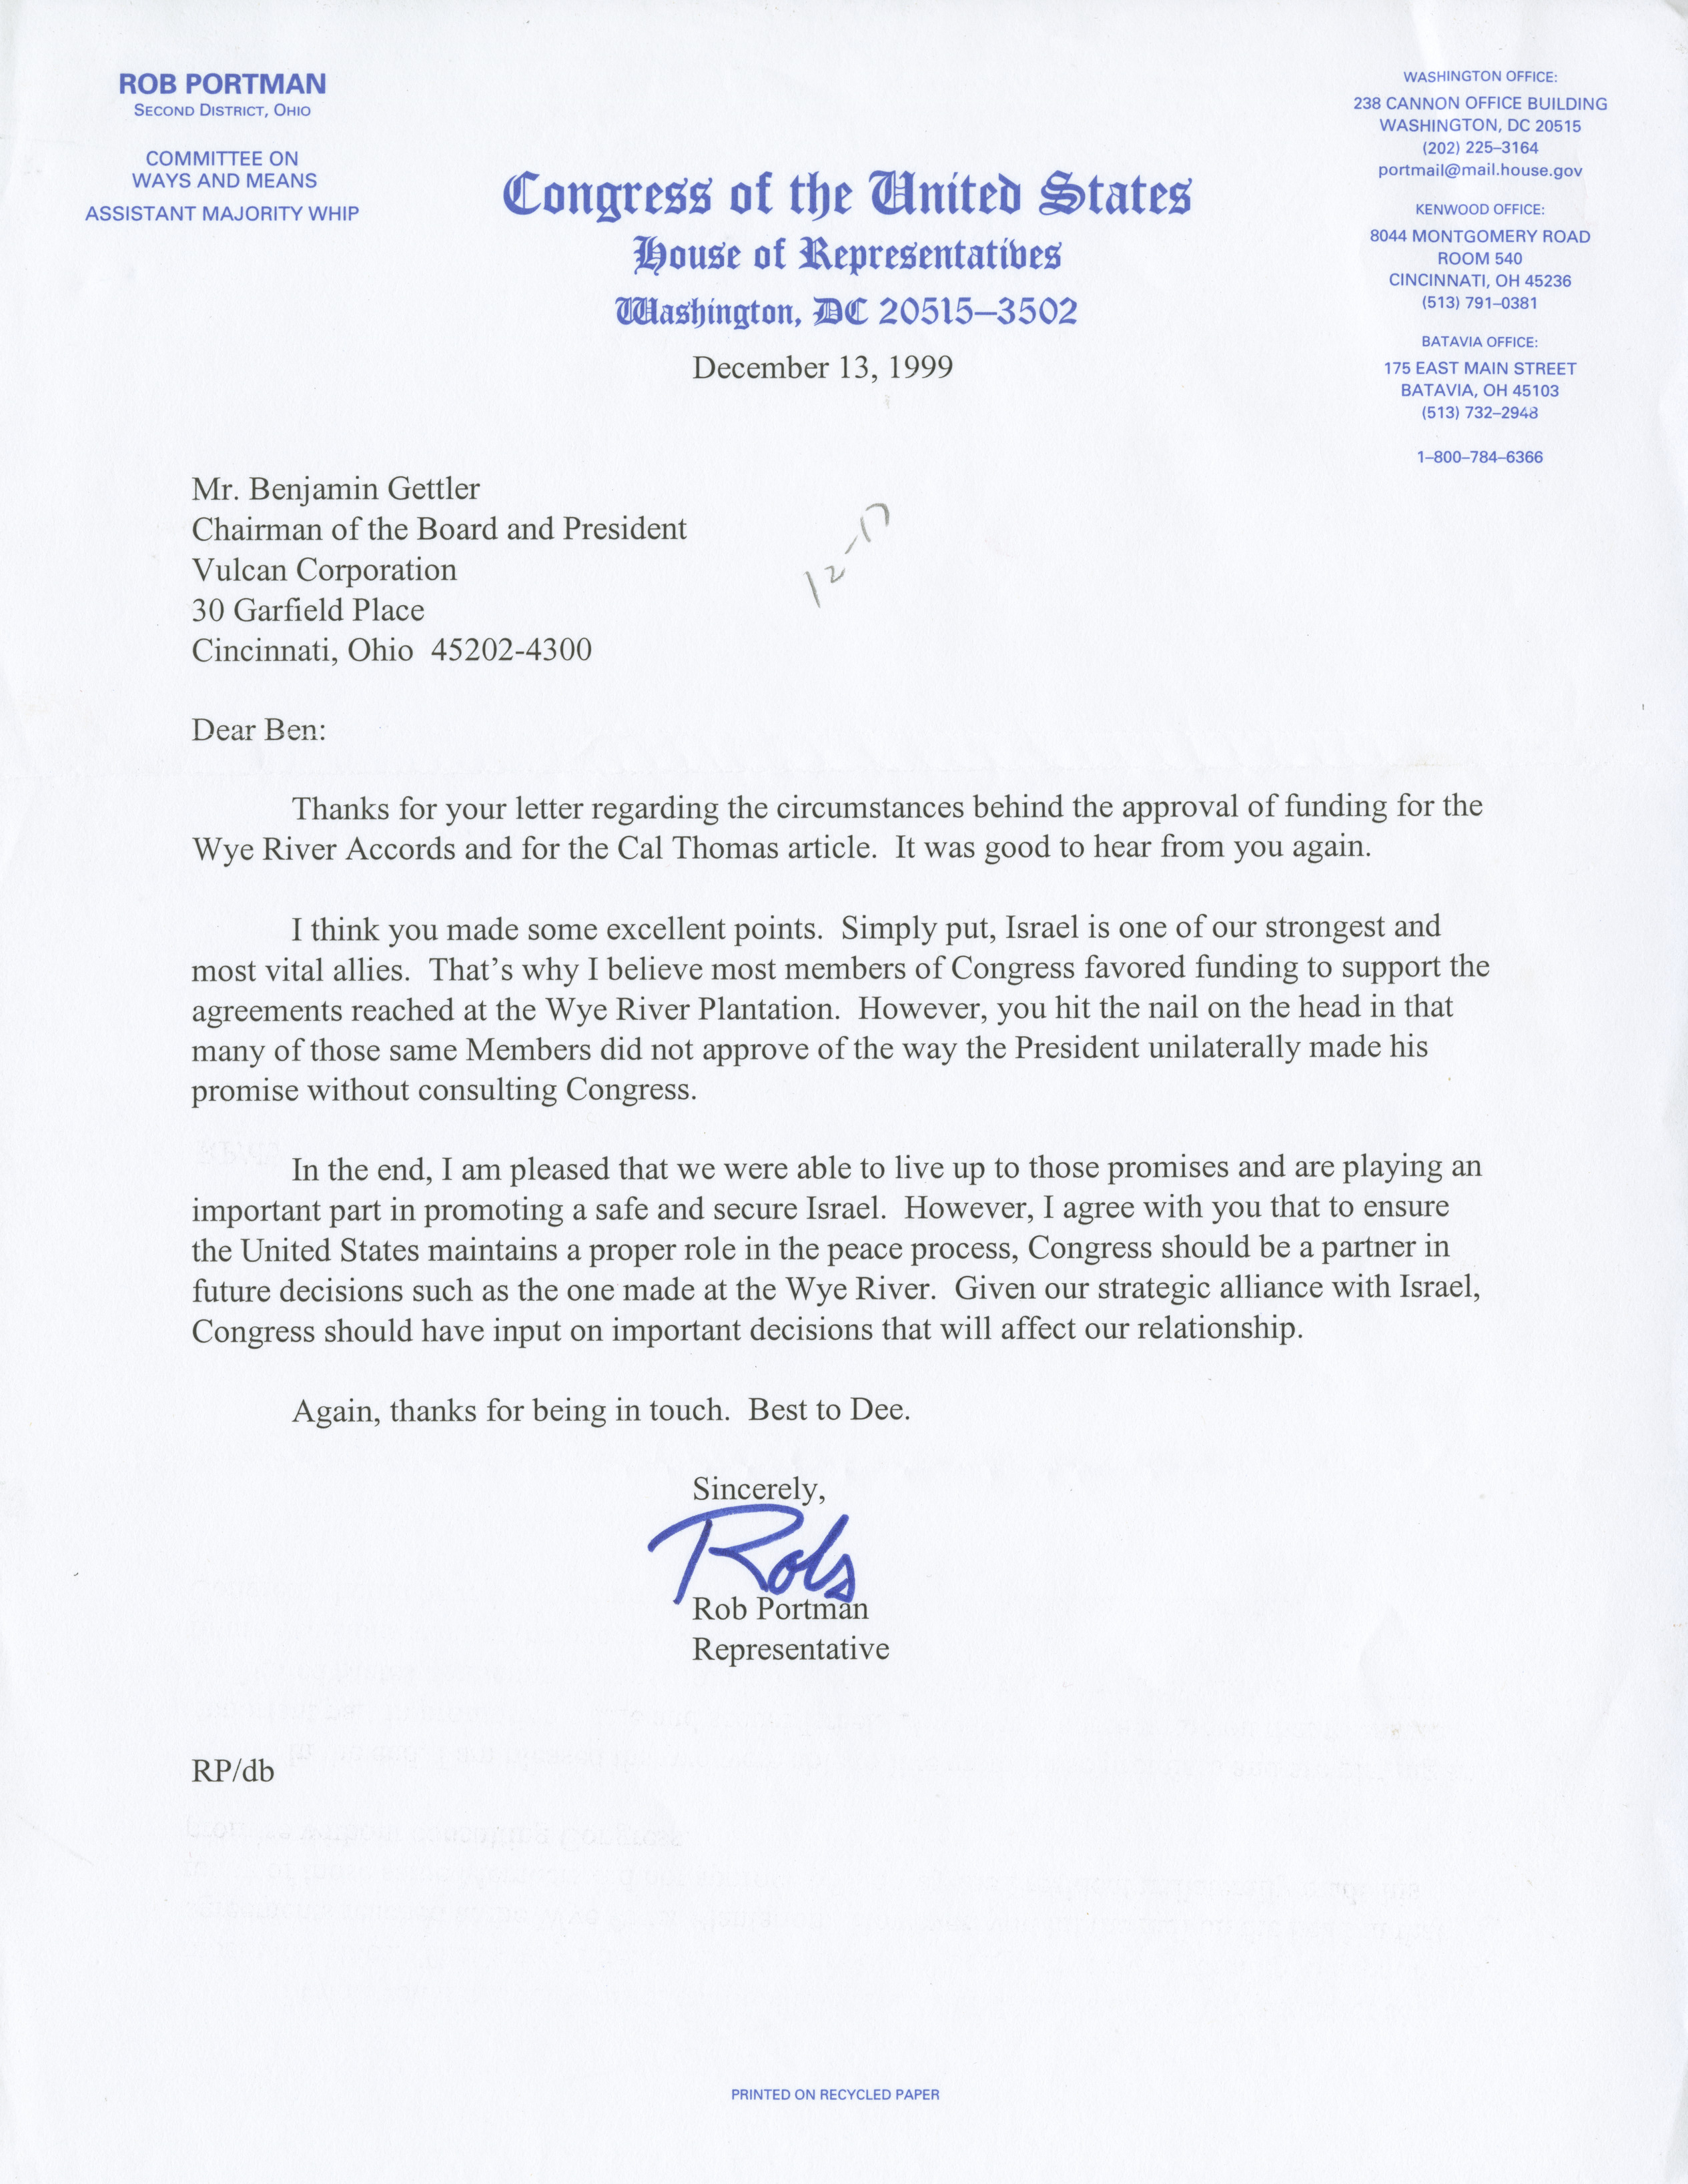 A letter dated December 13, 1999 from Rob Portman to Gettler discussing affairs in Israel.